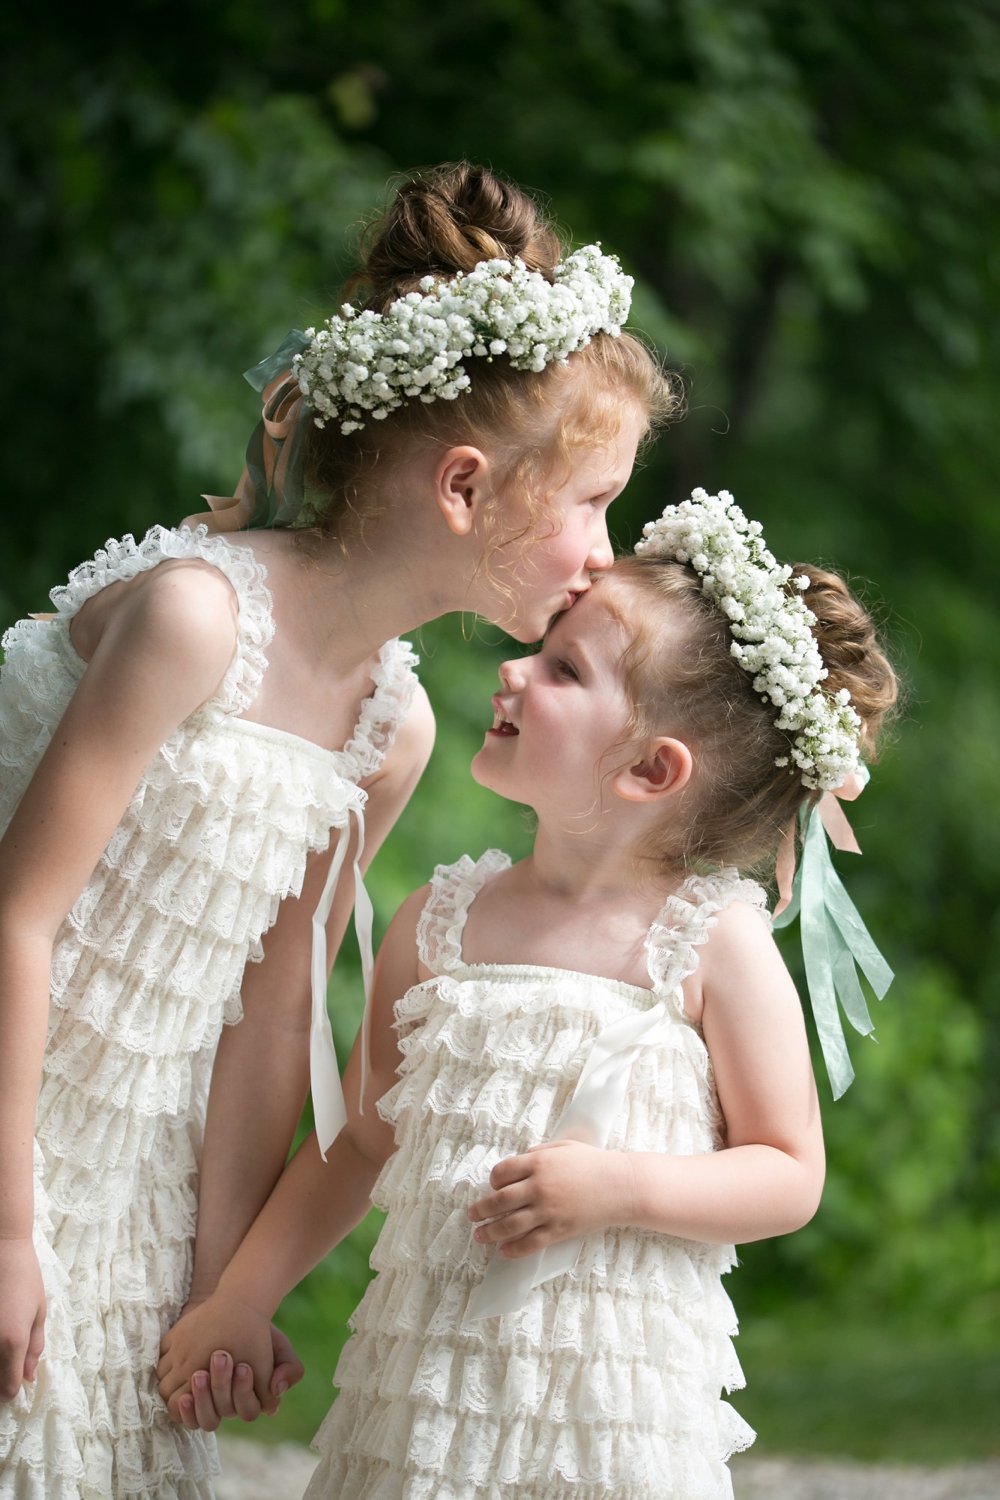 Sweet flower girls with babies breath floral crowns, in J.Crew dresses at rustic wedding in Maine